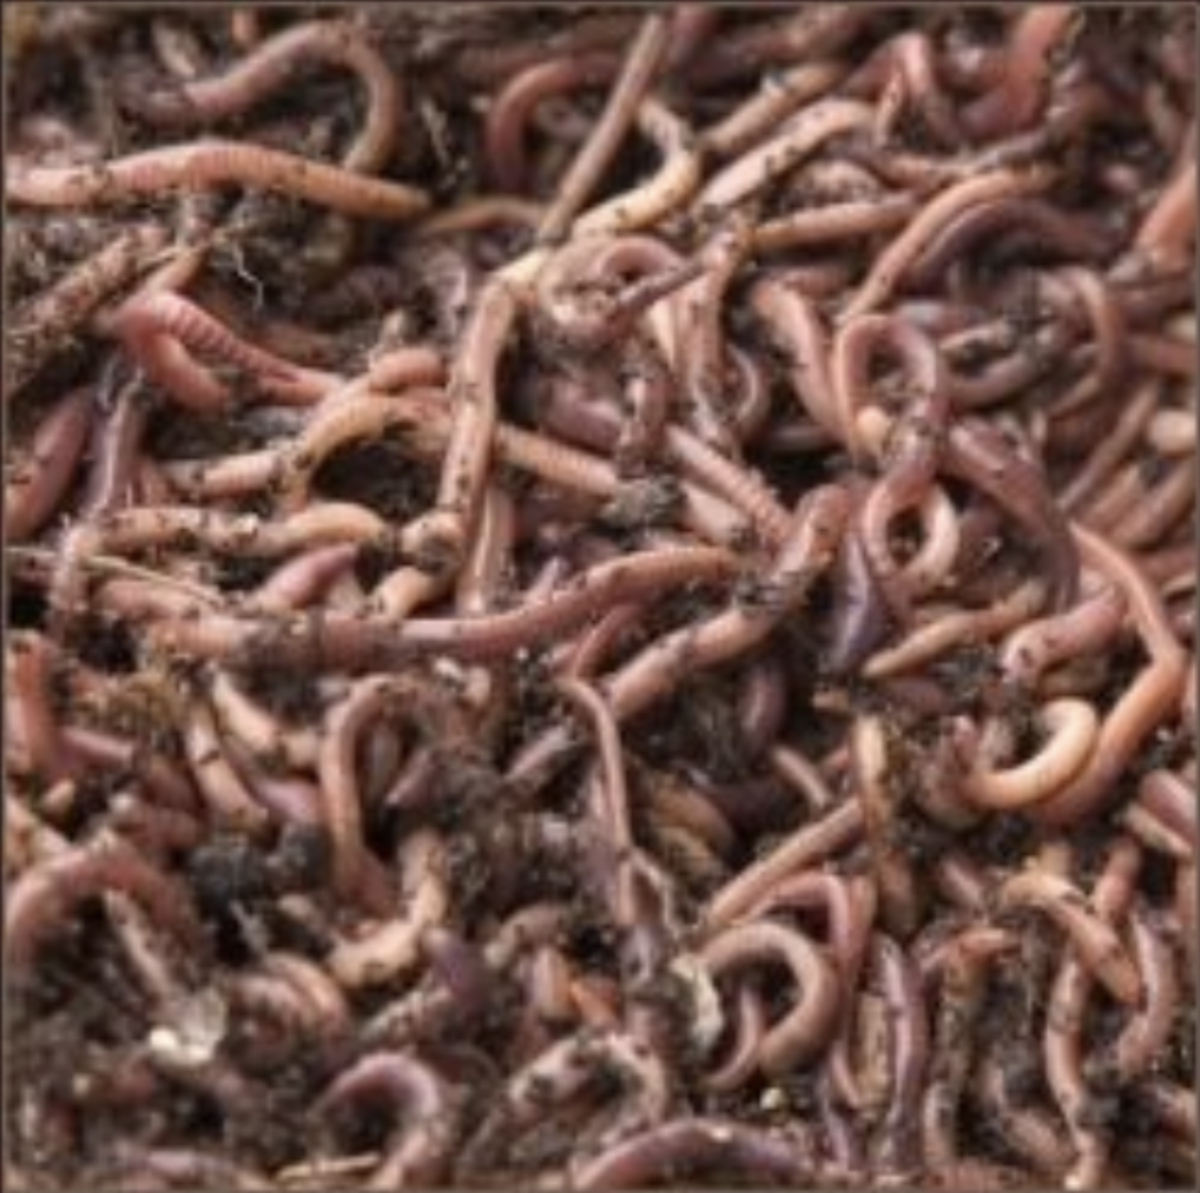 Red wiggler worms